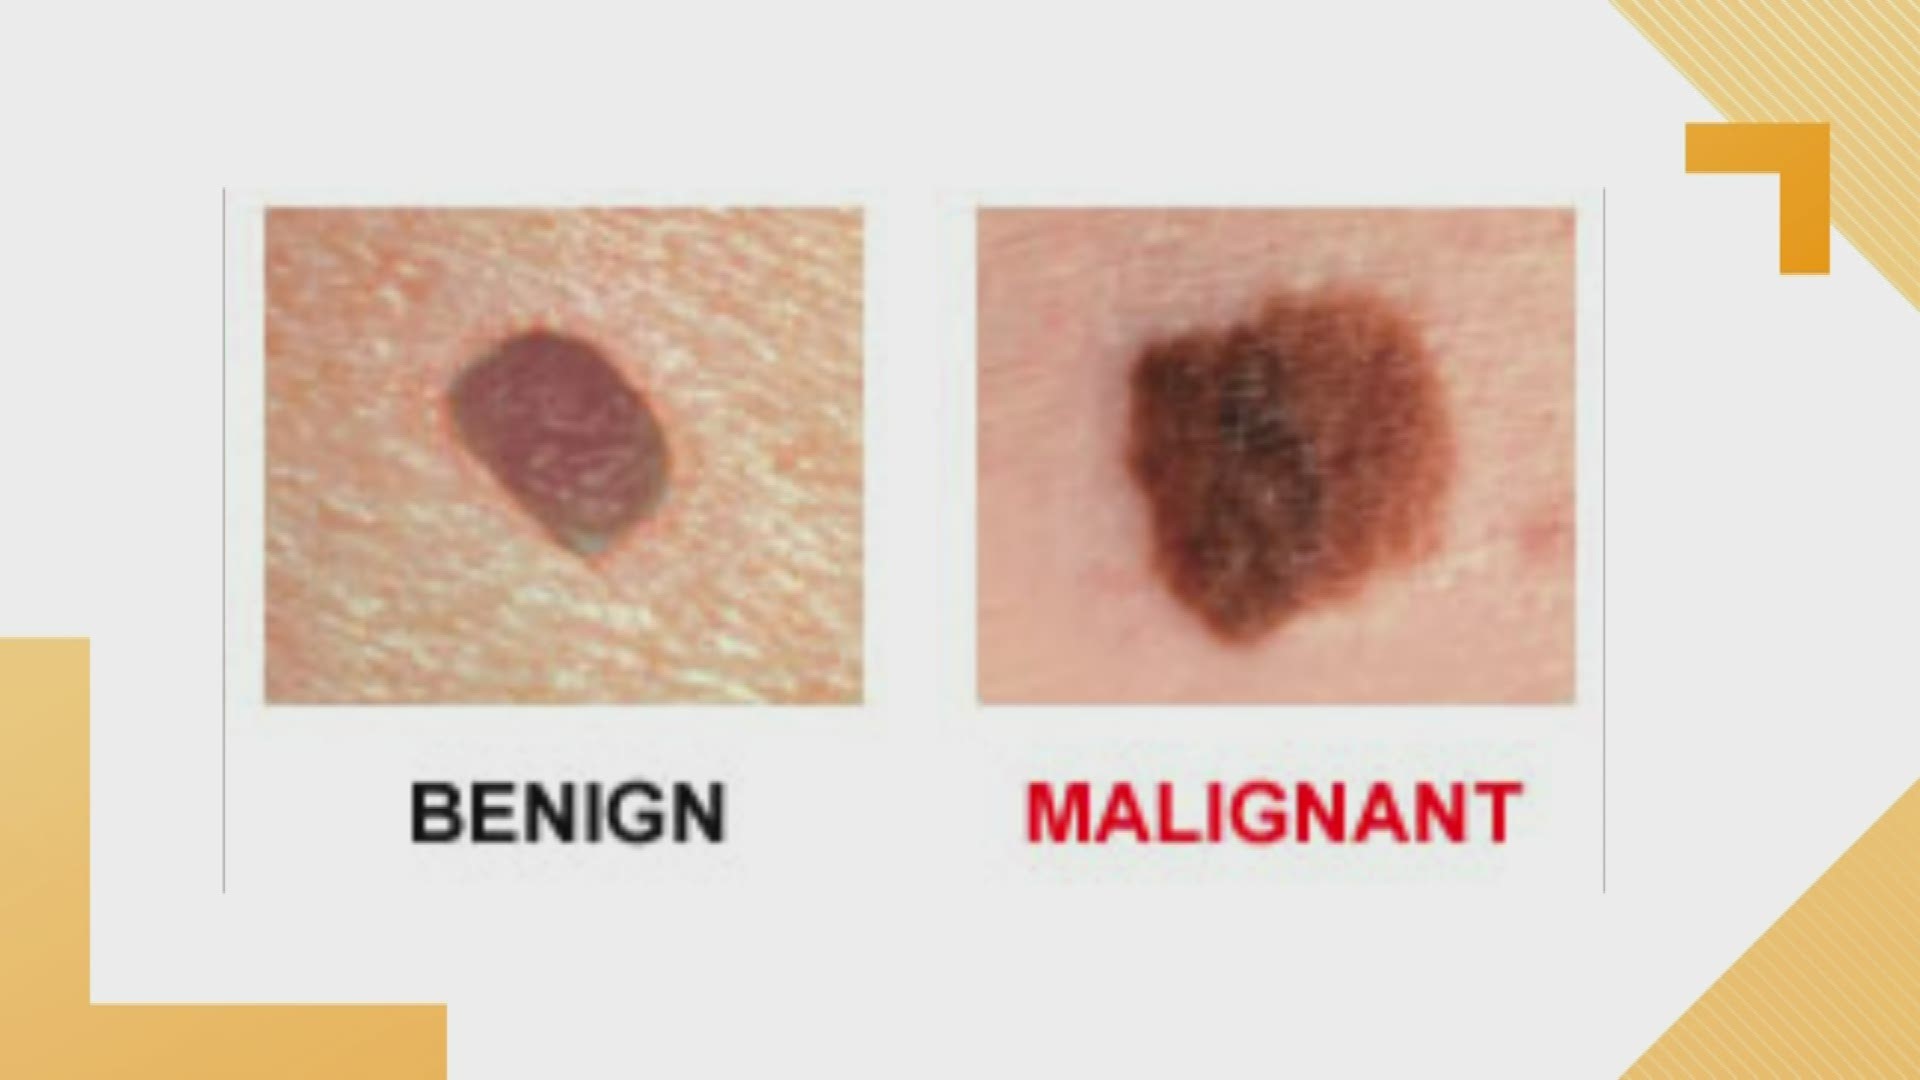 Dr. Patricia Farris goes through some of the warning signs you should be aware of when it comes to Skin Cancer on this Melanoma Monday.